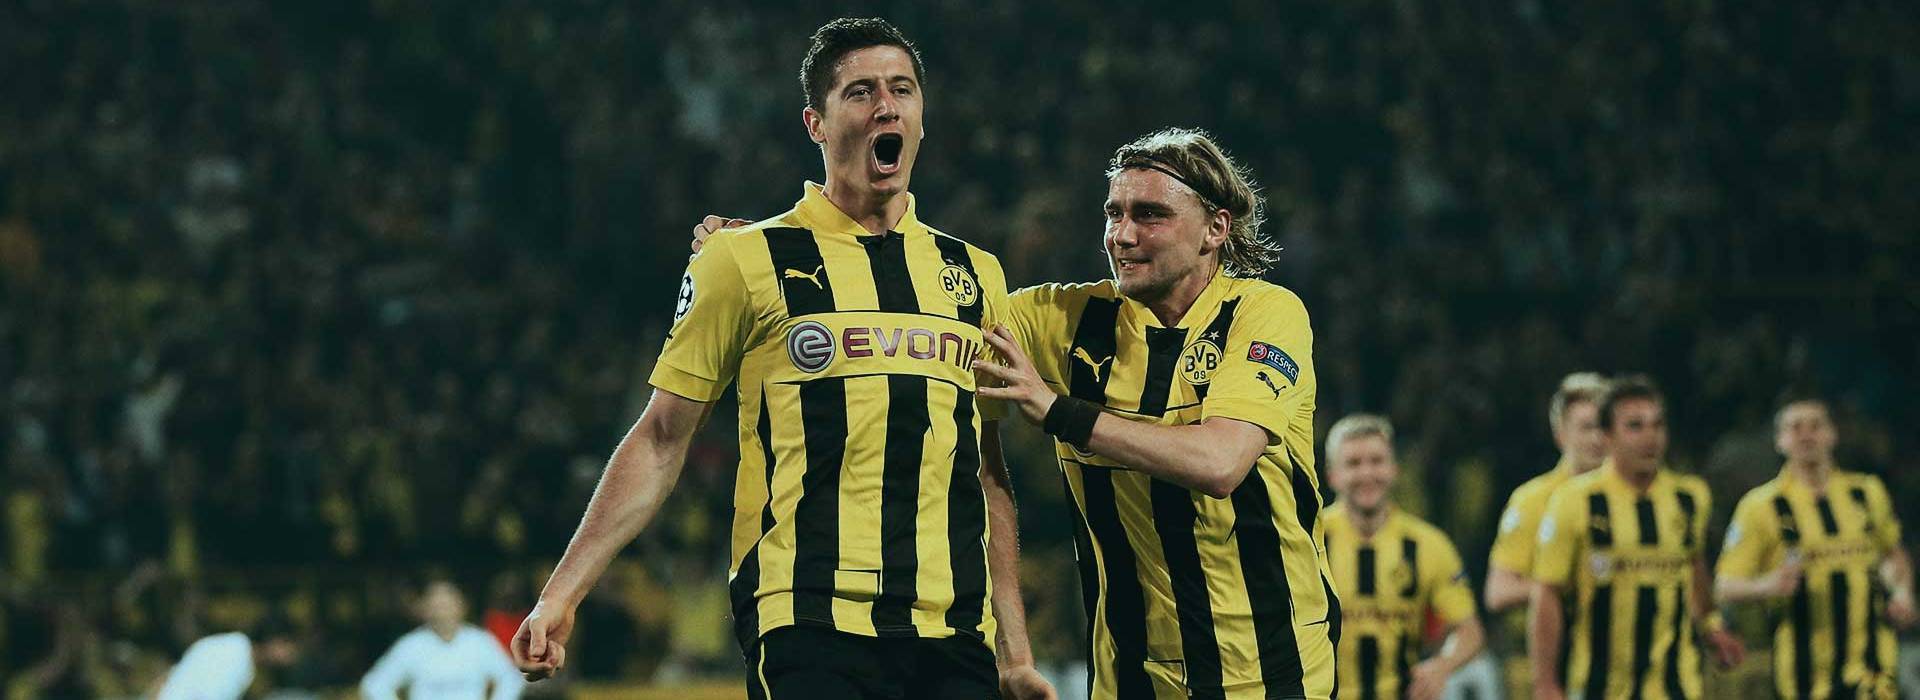 Playing at home in the first leg is no disadvantage for BVB 